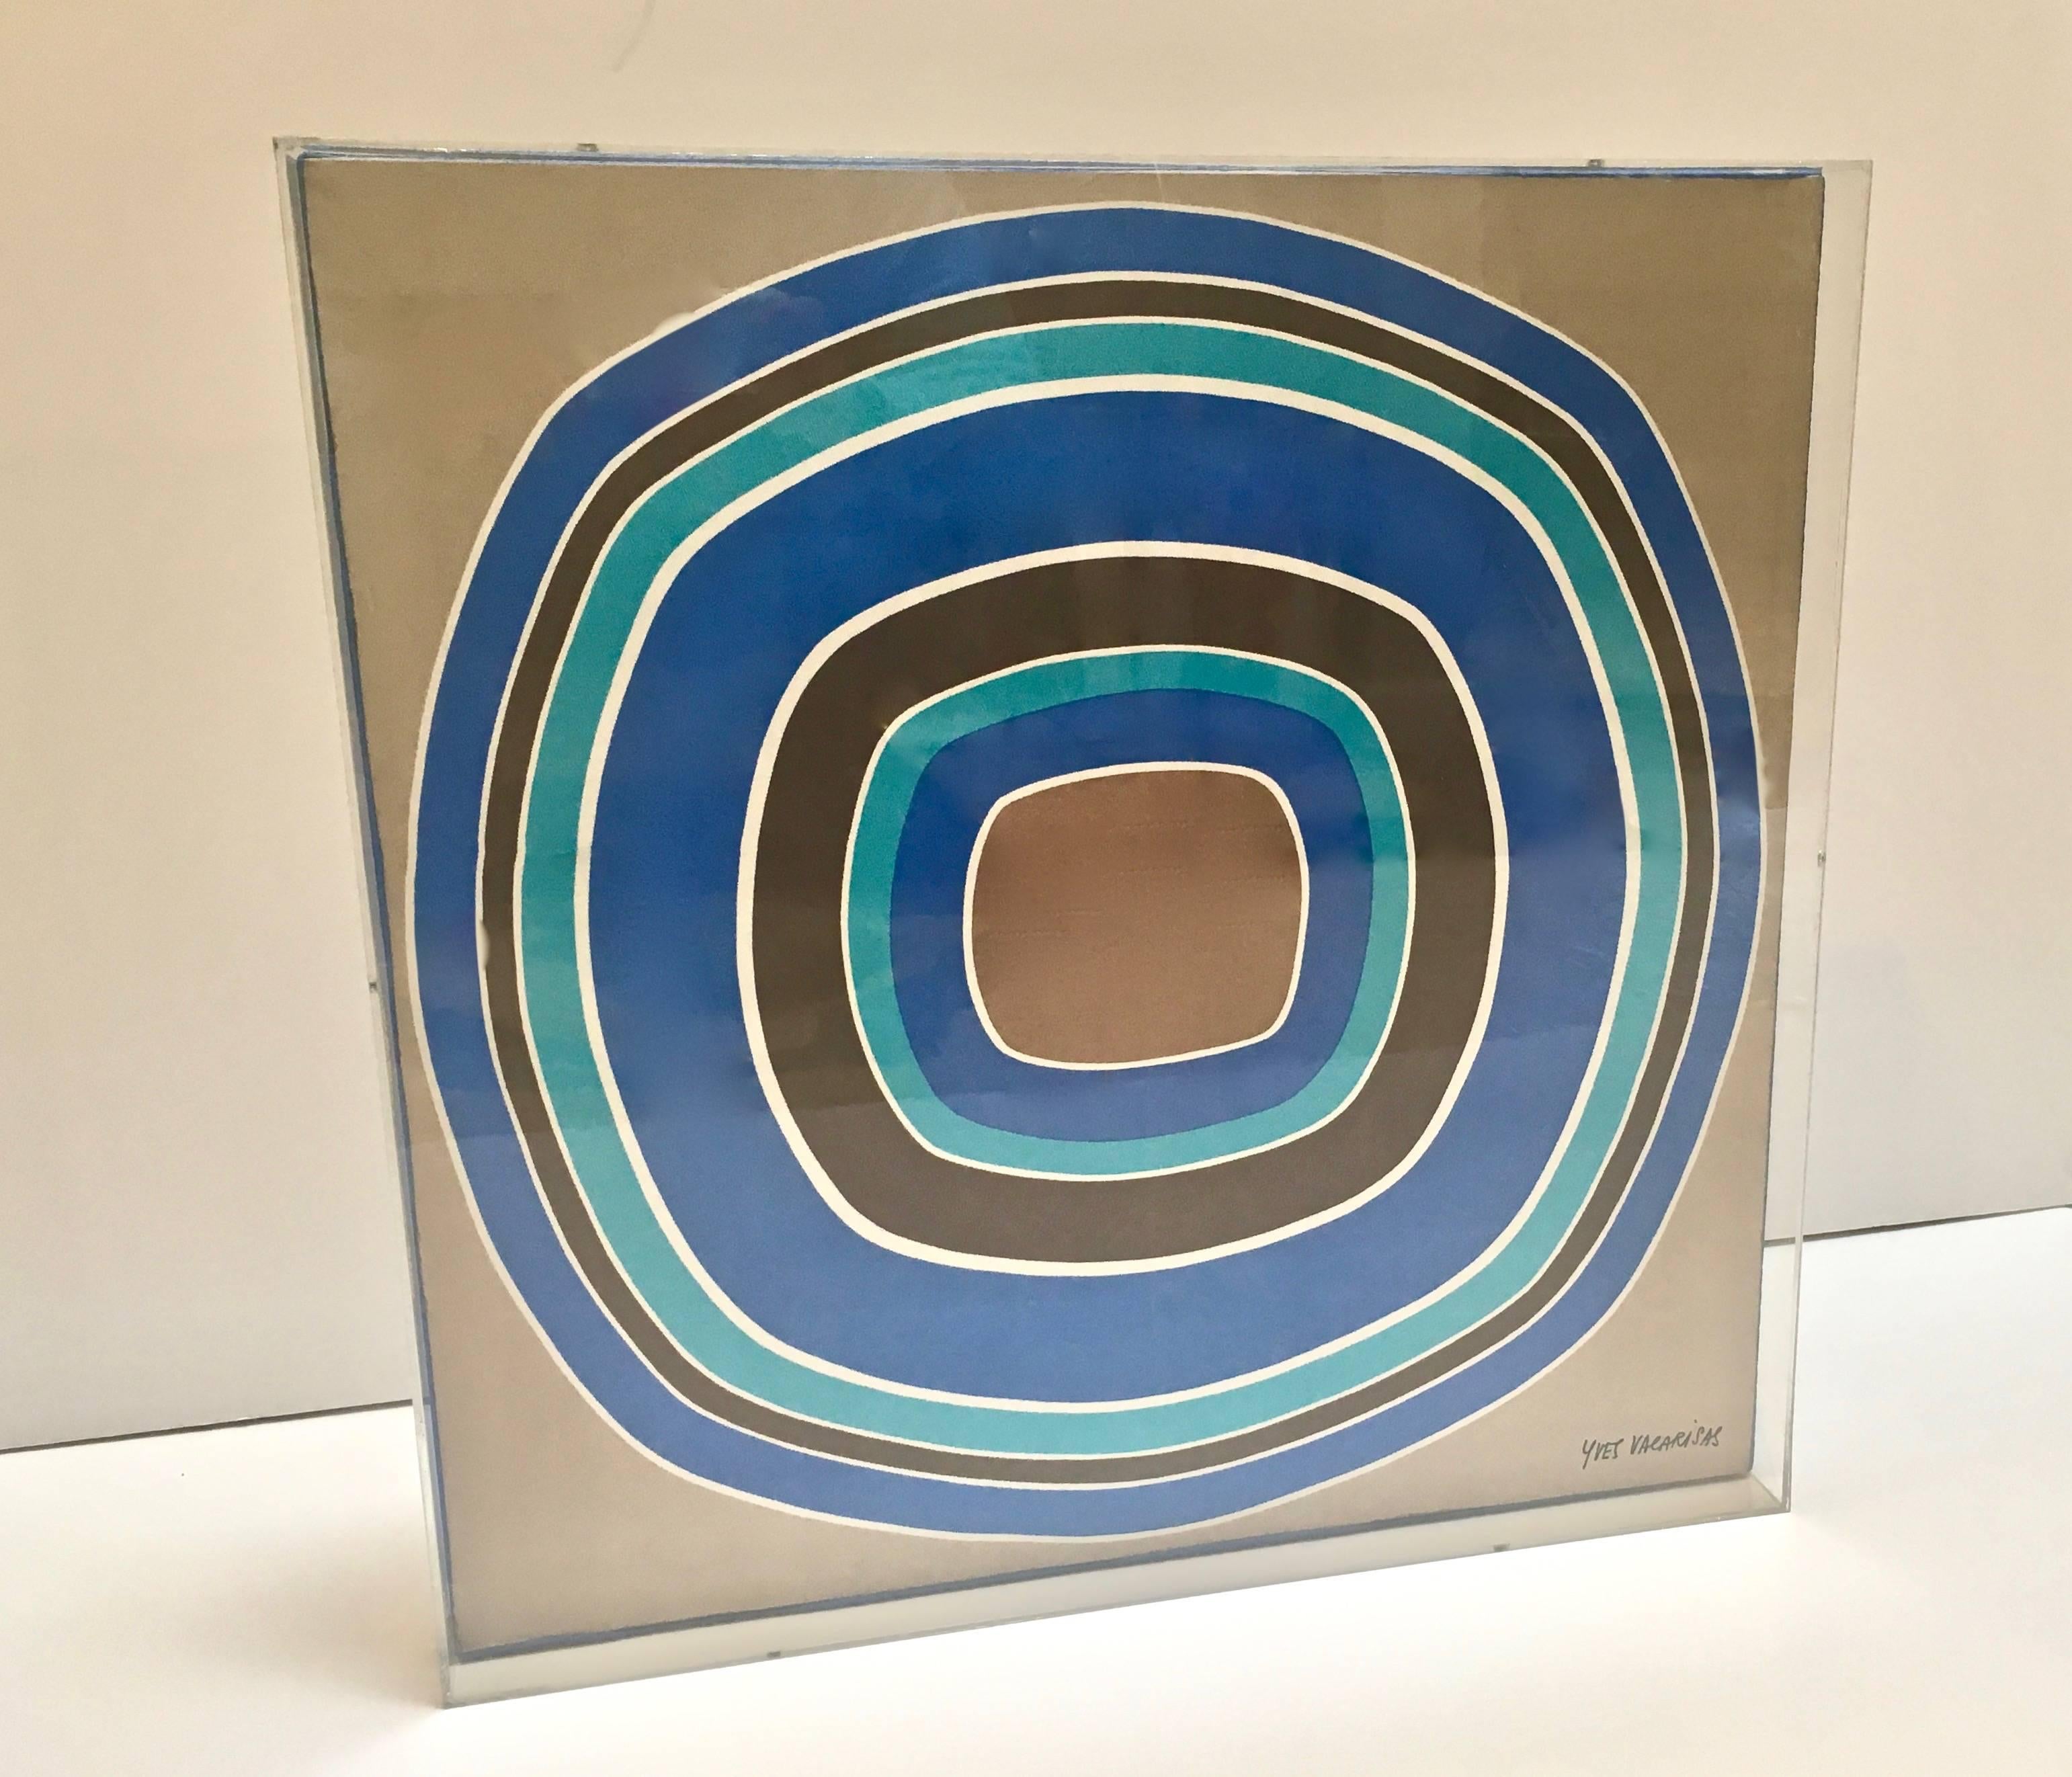 Vintage 1970s silk scarf newly framed in custom Lucite box. Artist signature in lower right hand corner, by Yves Vacarisas. A great graphic abstract design of concentric circles, in the manner of Artist Kenneth Noland, in contrasting tones of blues